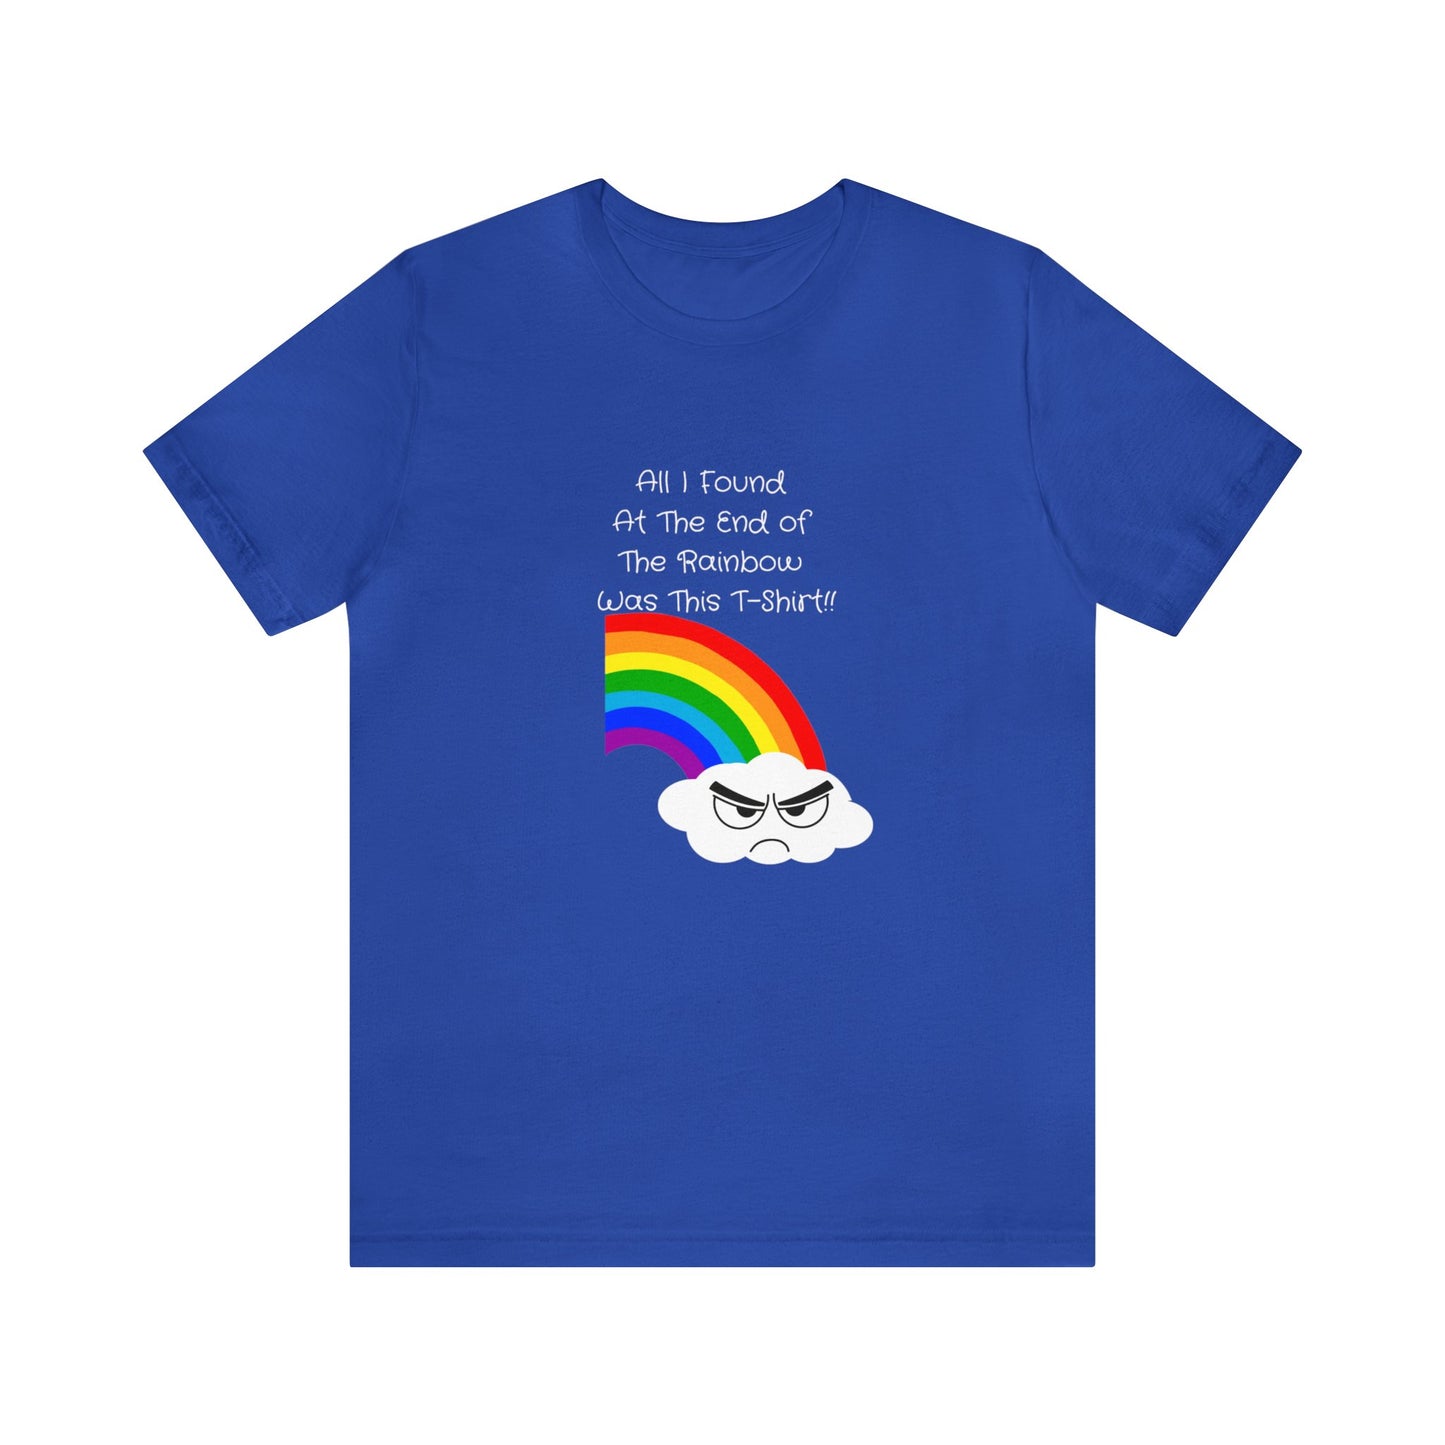 All I Found At The End of The Rainbow Unisex T-Shirt